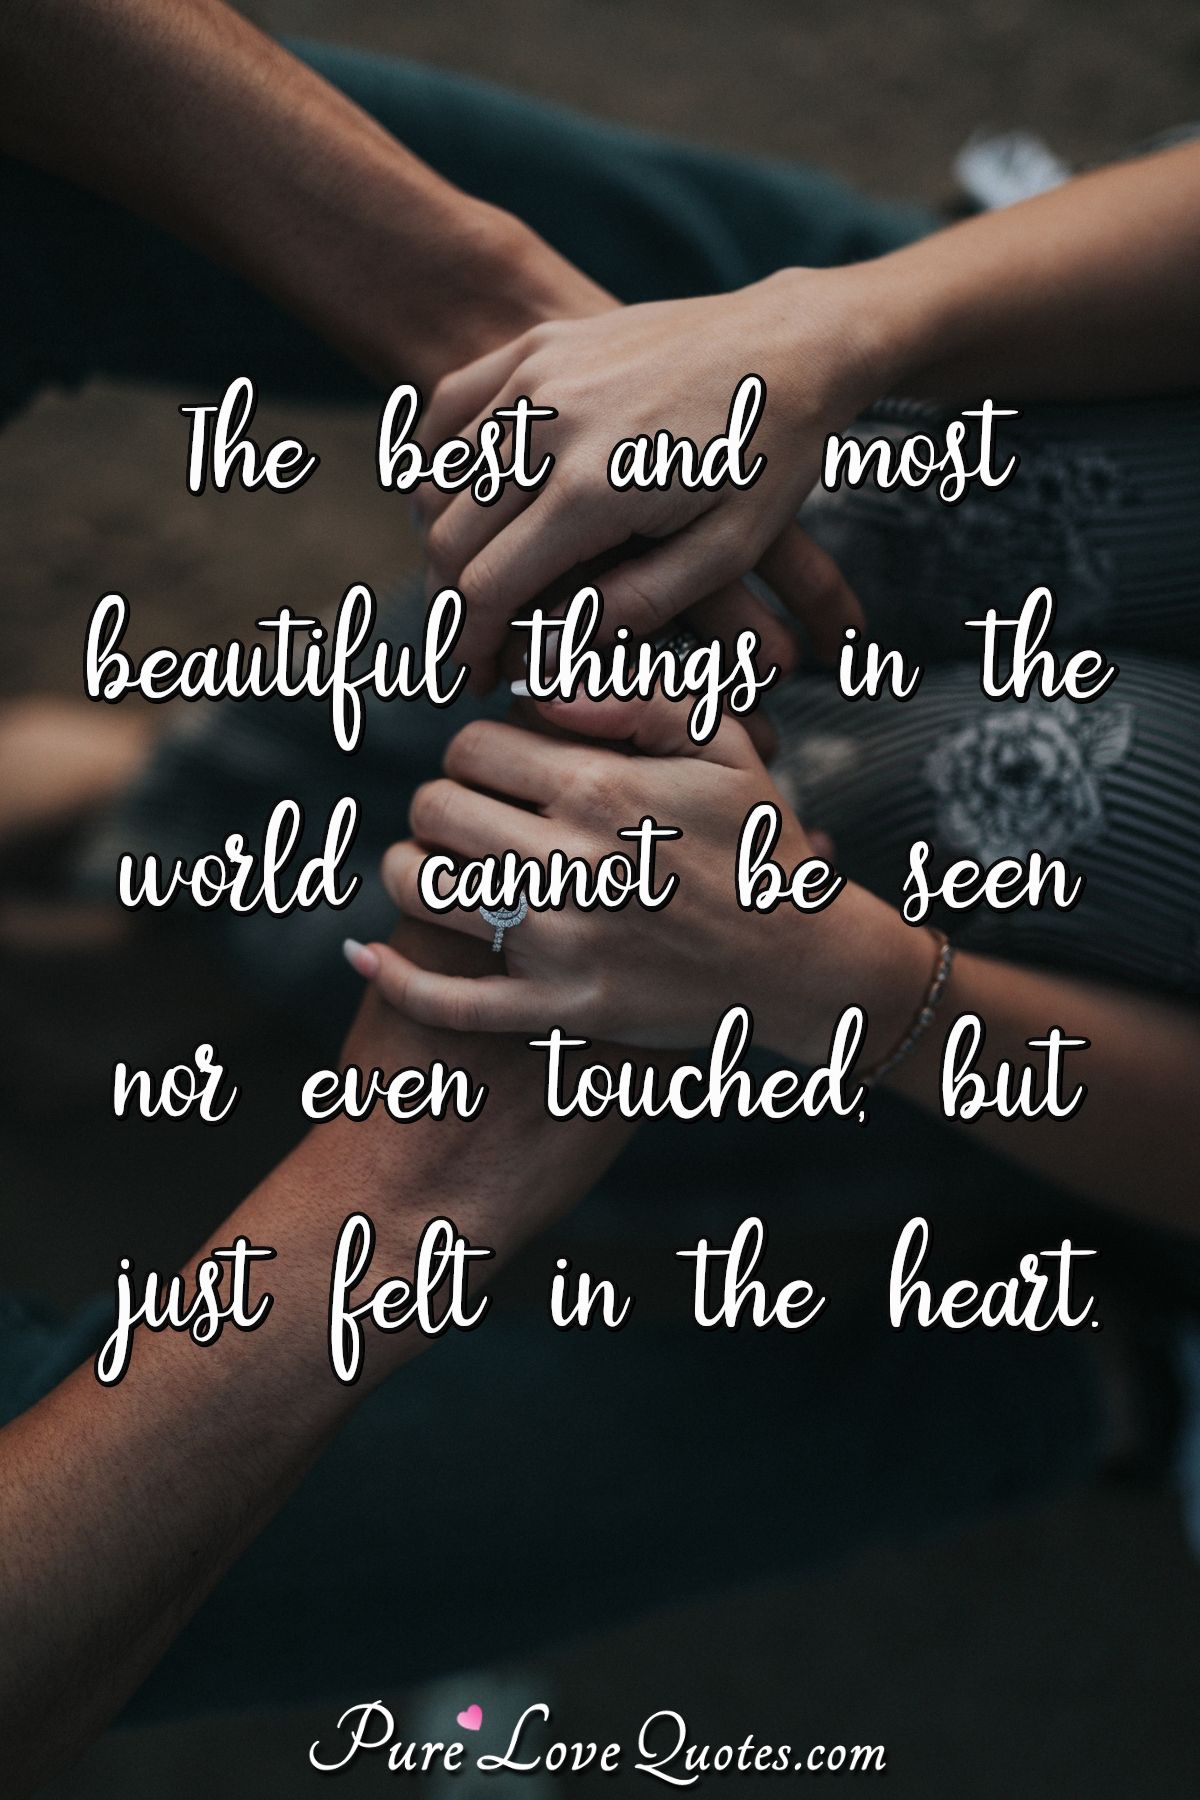 most beautiful heart in the world